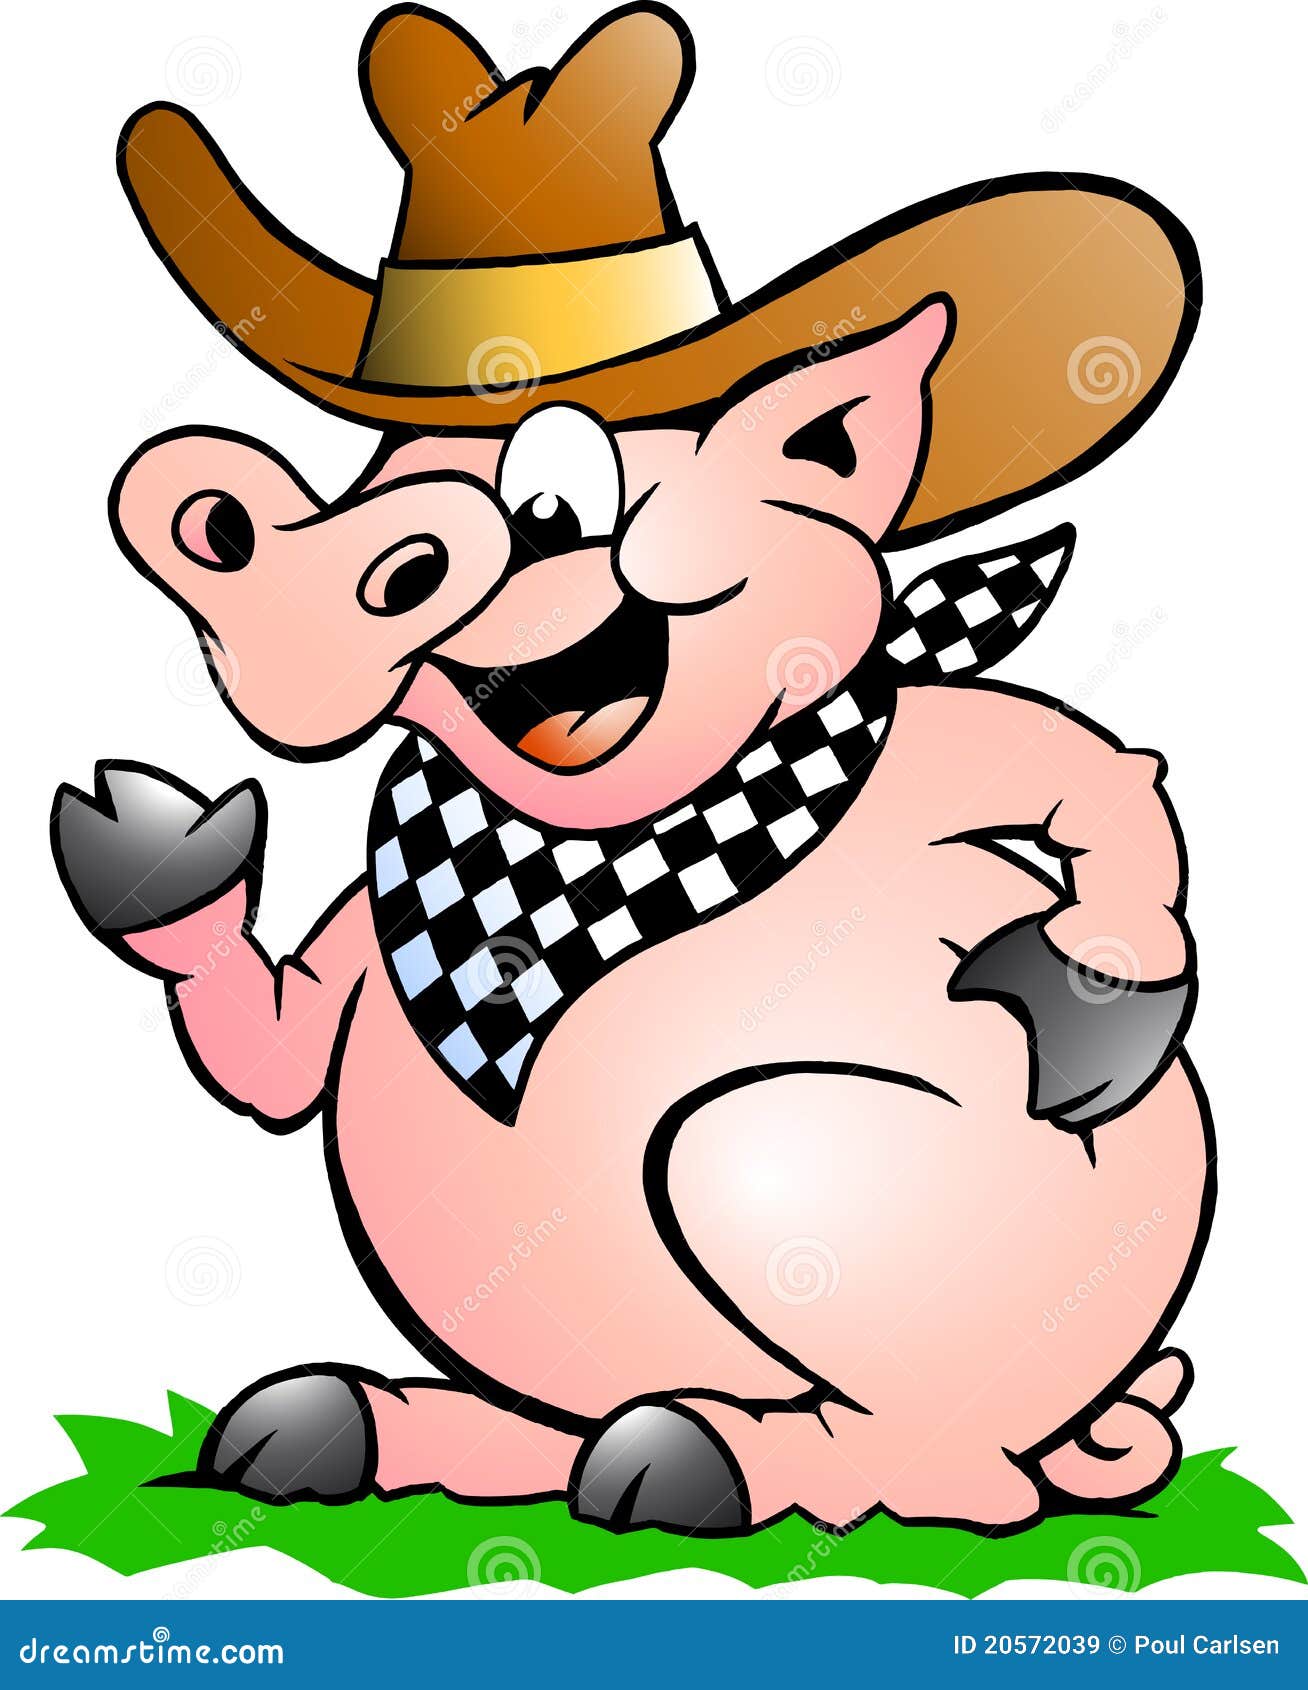 clipart pig cooking - photo #41